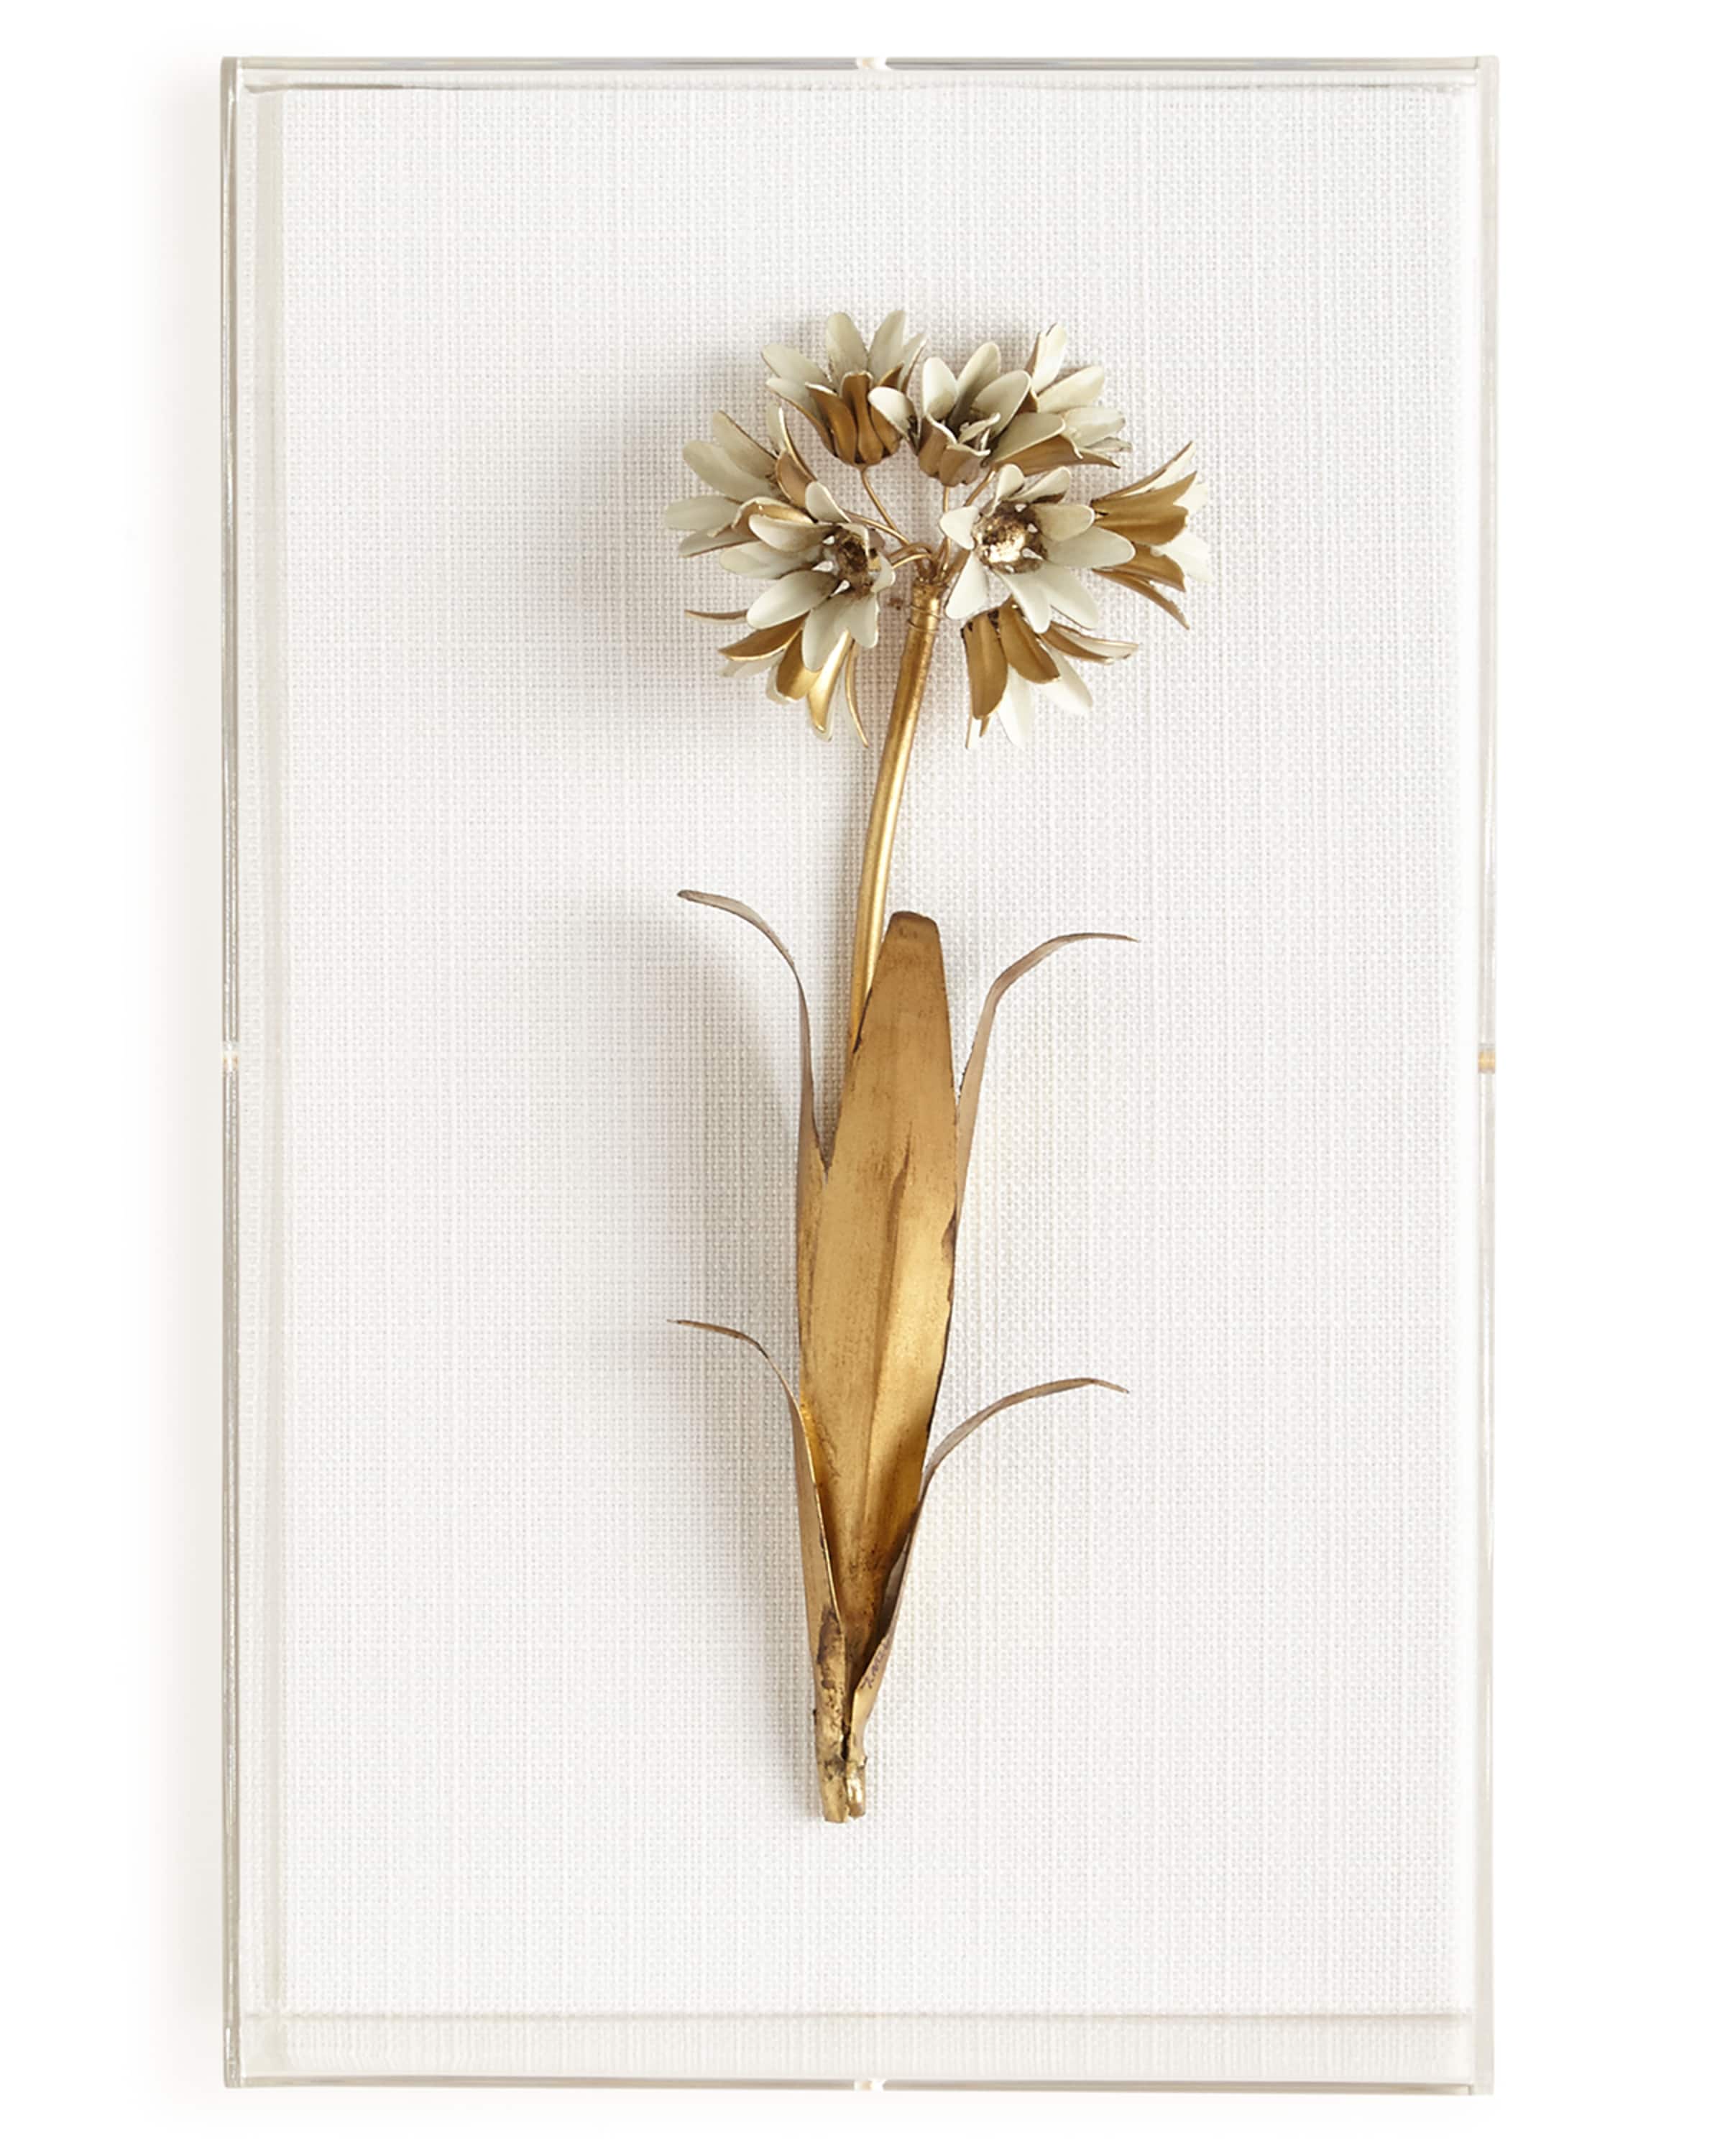 Tommy Mitchell Original Gilded Agapanthus Study on Linen